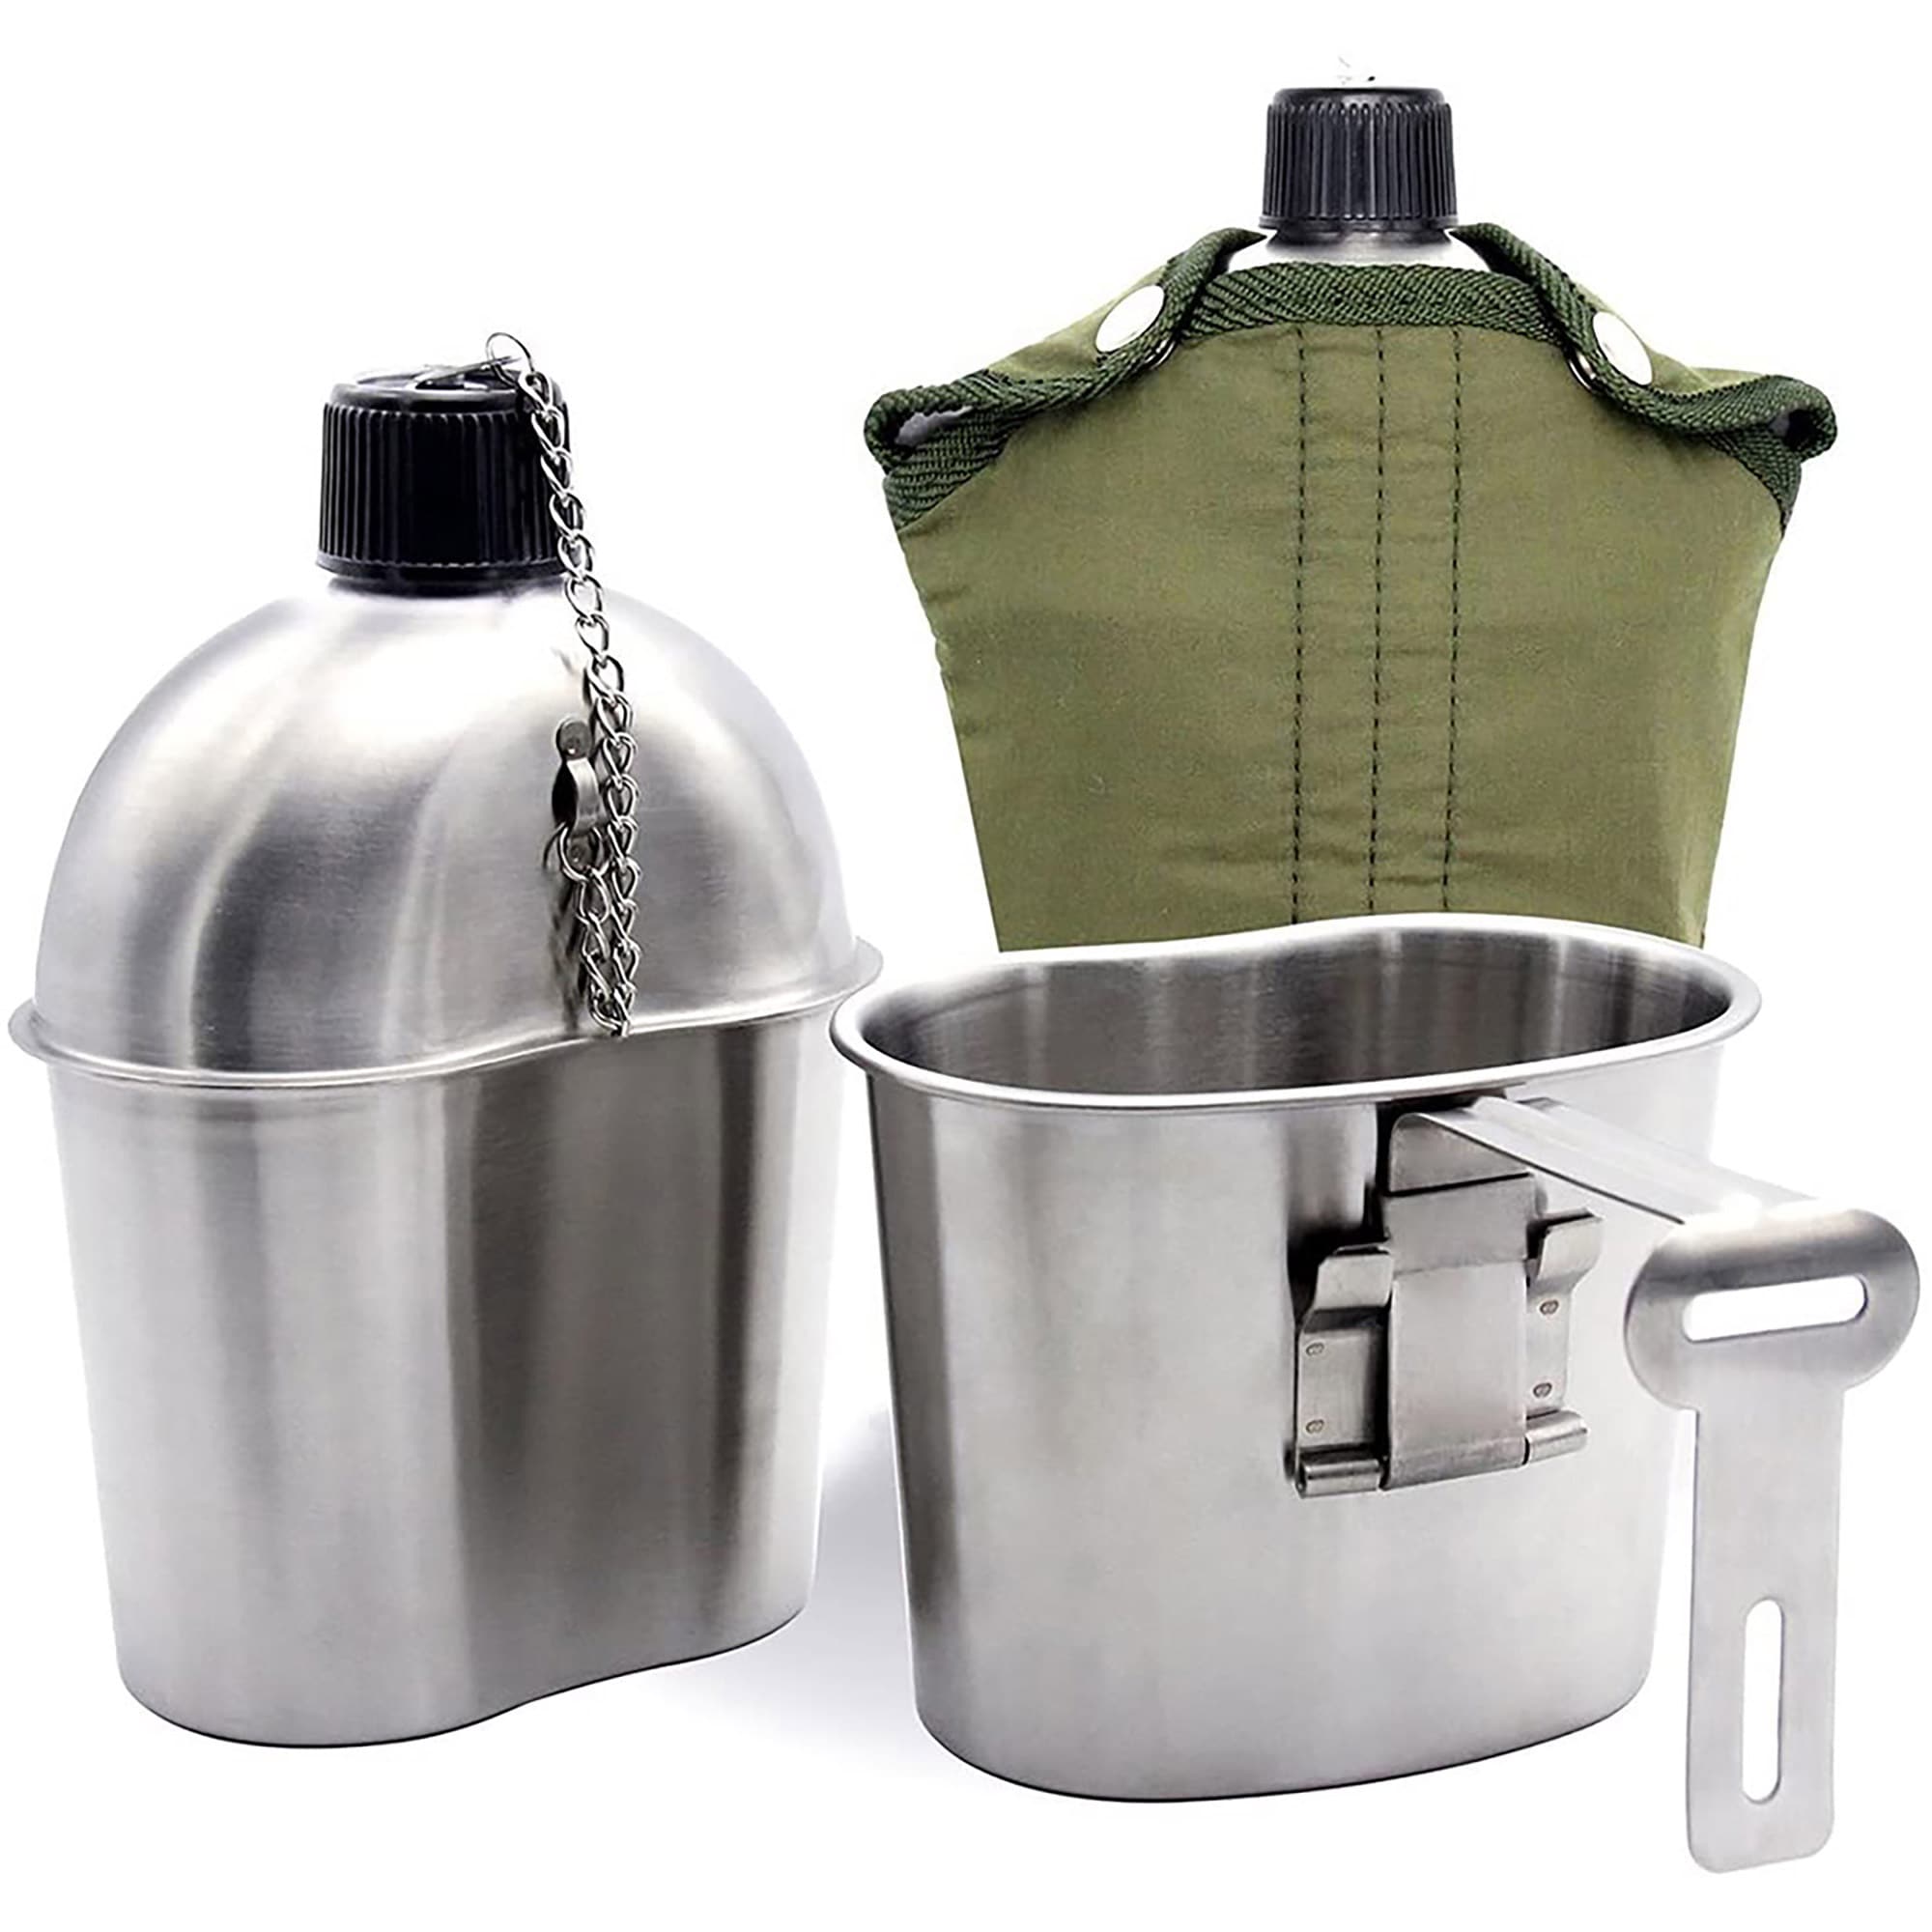 Stainless Steel Bottle - Buy Outdoor Bottle Cooking Kits